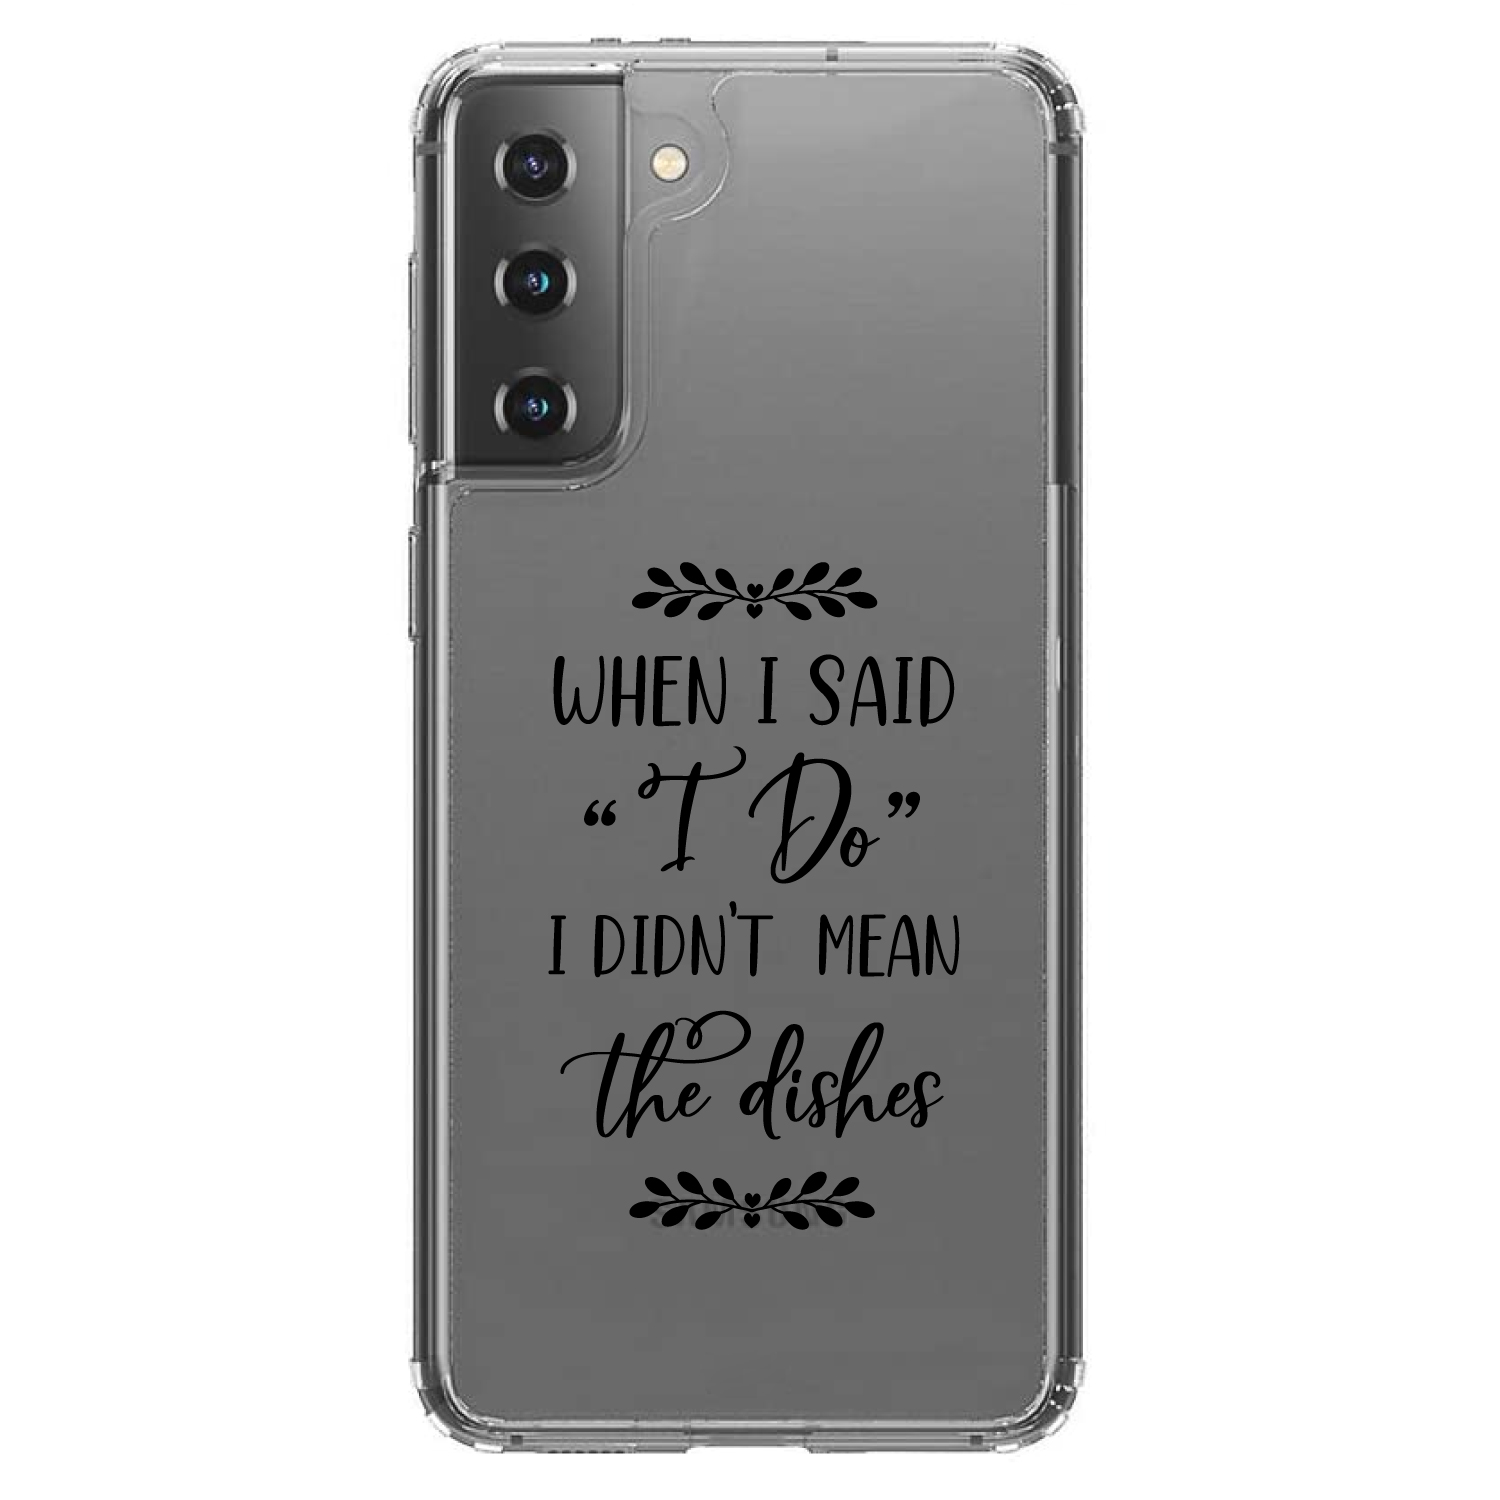 DistinctInk Clear Shockproof Hybrid Case for Galaxy S21 5G (6.2" Screen) - TPU Bumper Acrylic Back Tempered Glass Screen Protector - When I Said I Do, I Didn't Mean the Dishes - image 1 of 2